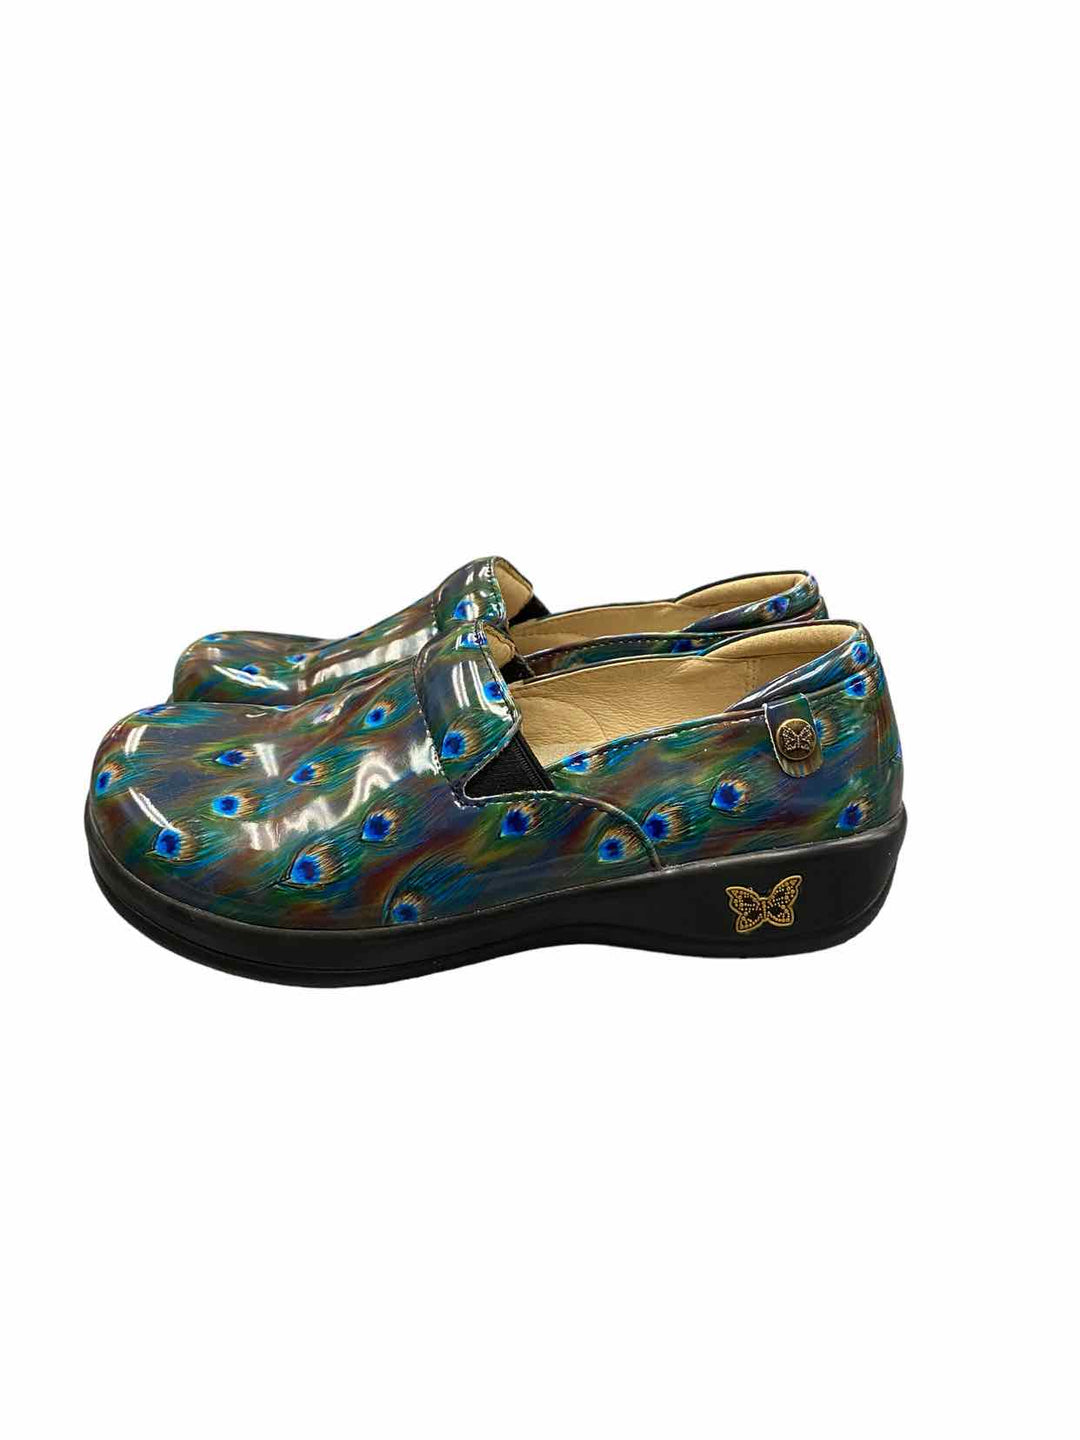 Alegria Shoe Size 36 Green Loafers